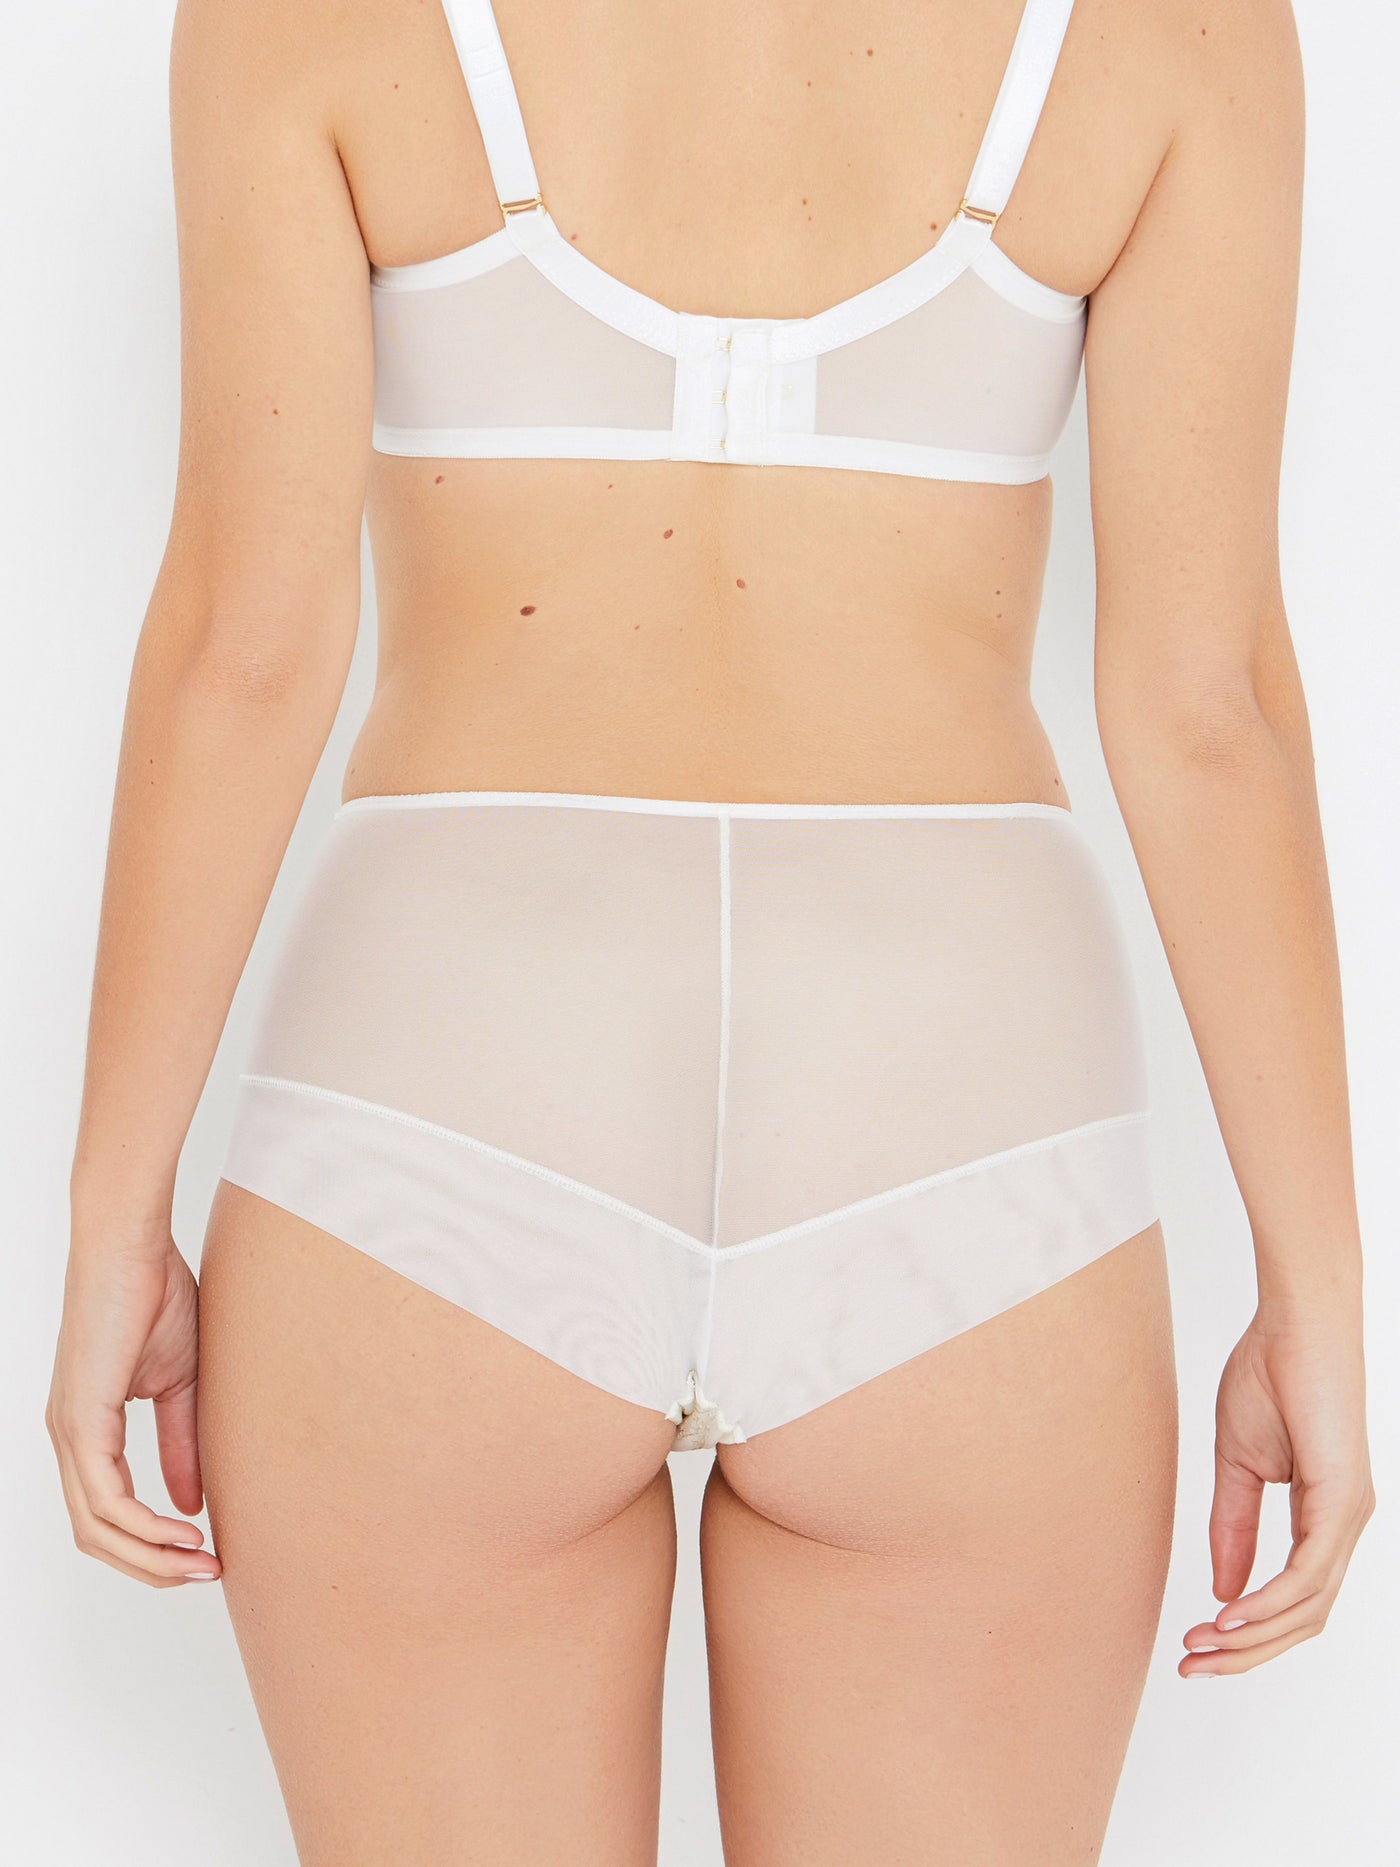 Grace ivory and gold lace high waist knickers back view